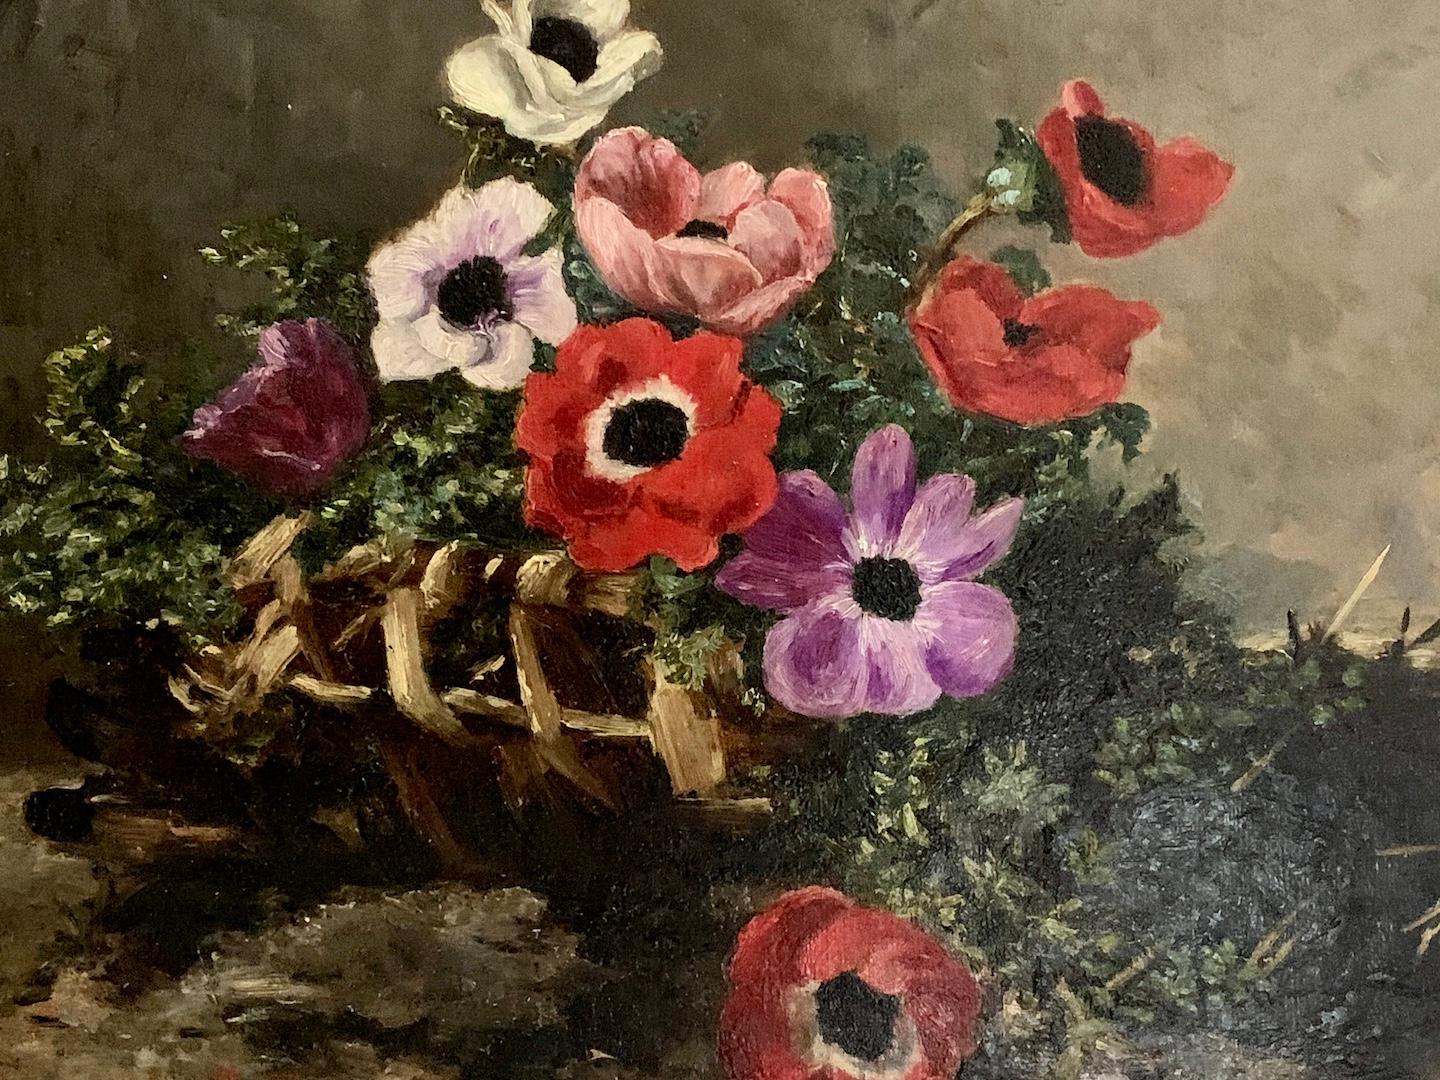 Antique French 19th century Still life of flowers in a basket - Painting by Lucienne Lemercier